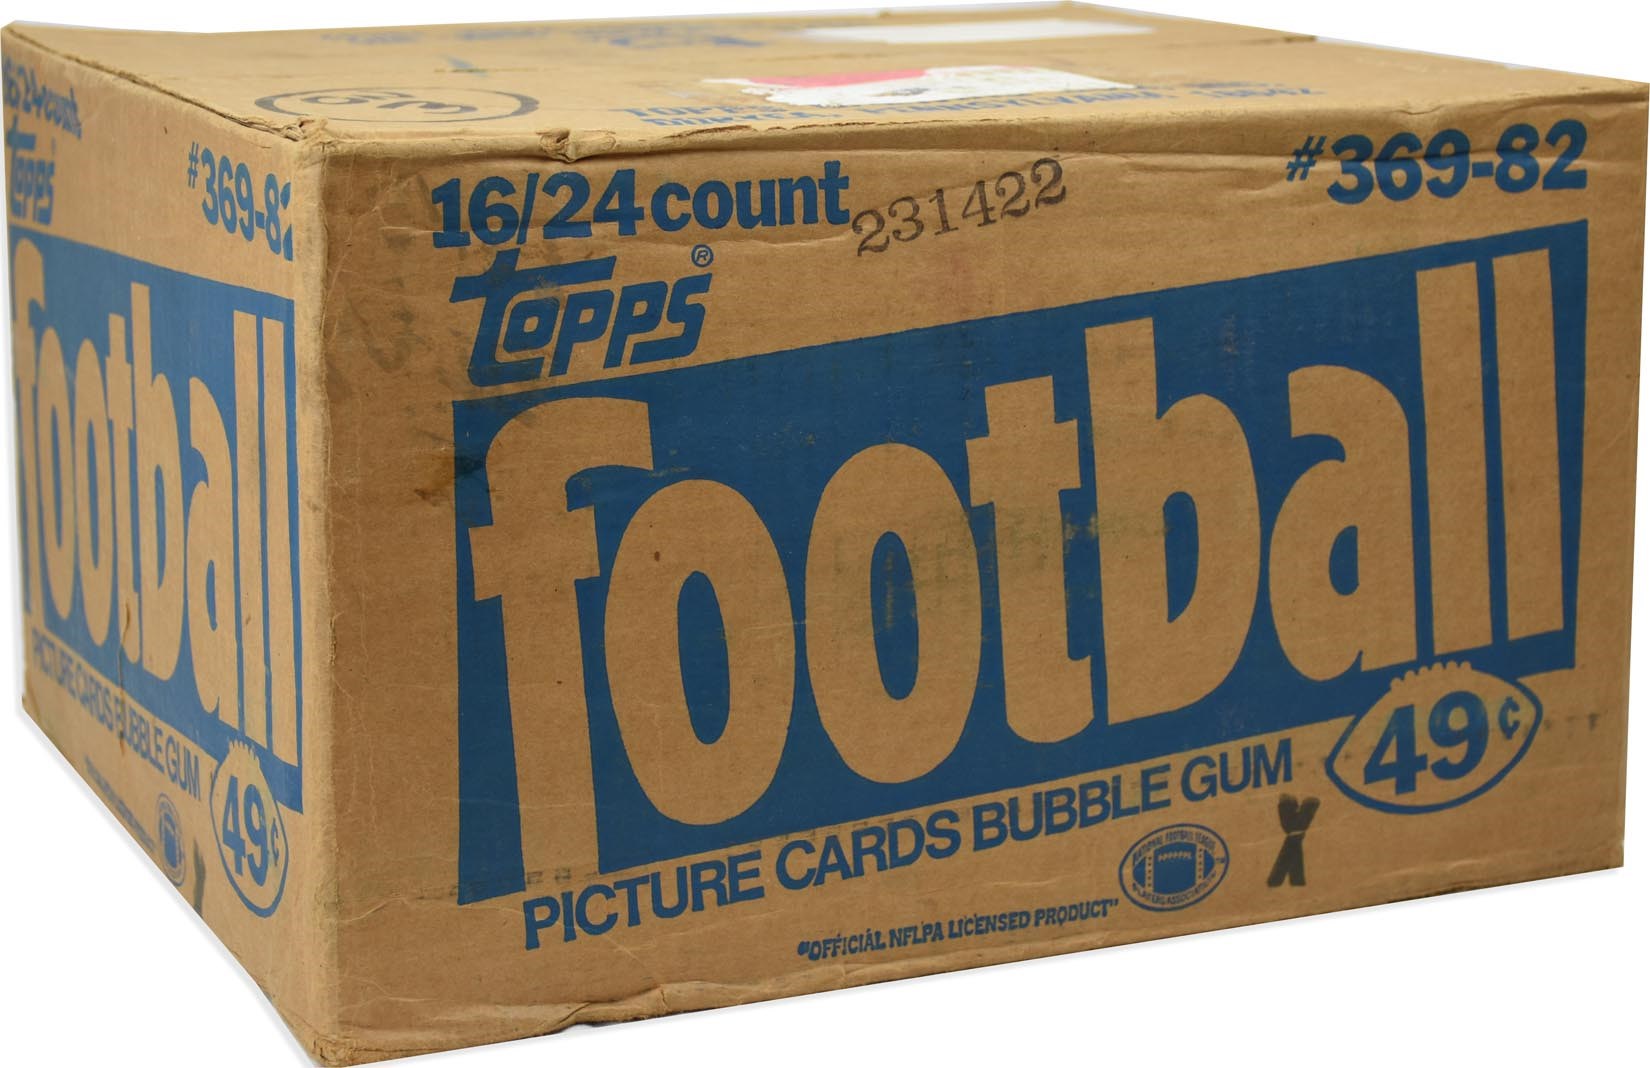 Unopened Wax Packs Boxes and Cases - 1982 Topps Football Unopened Cello Case